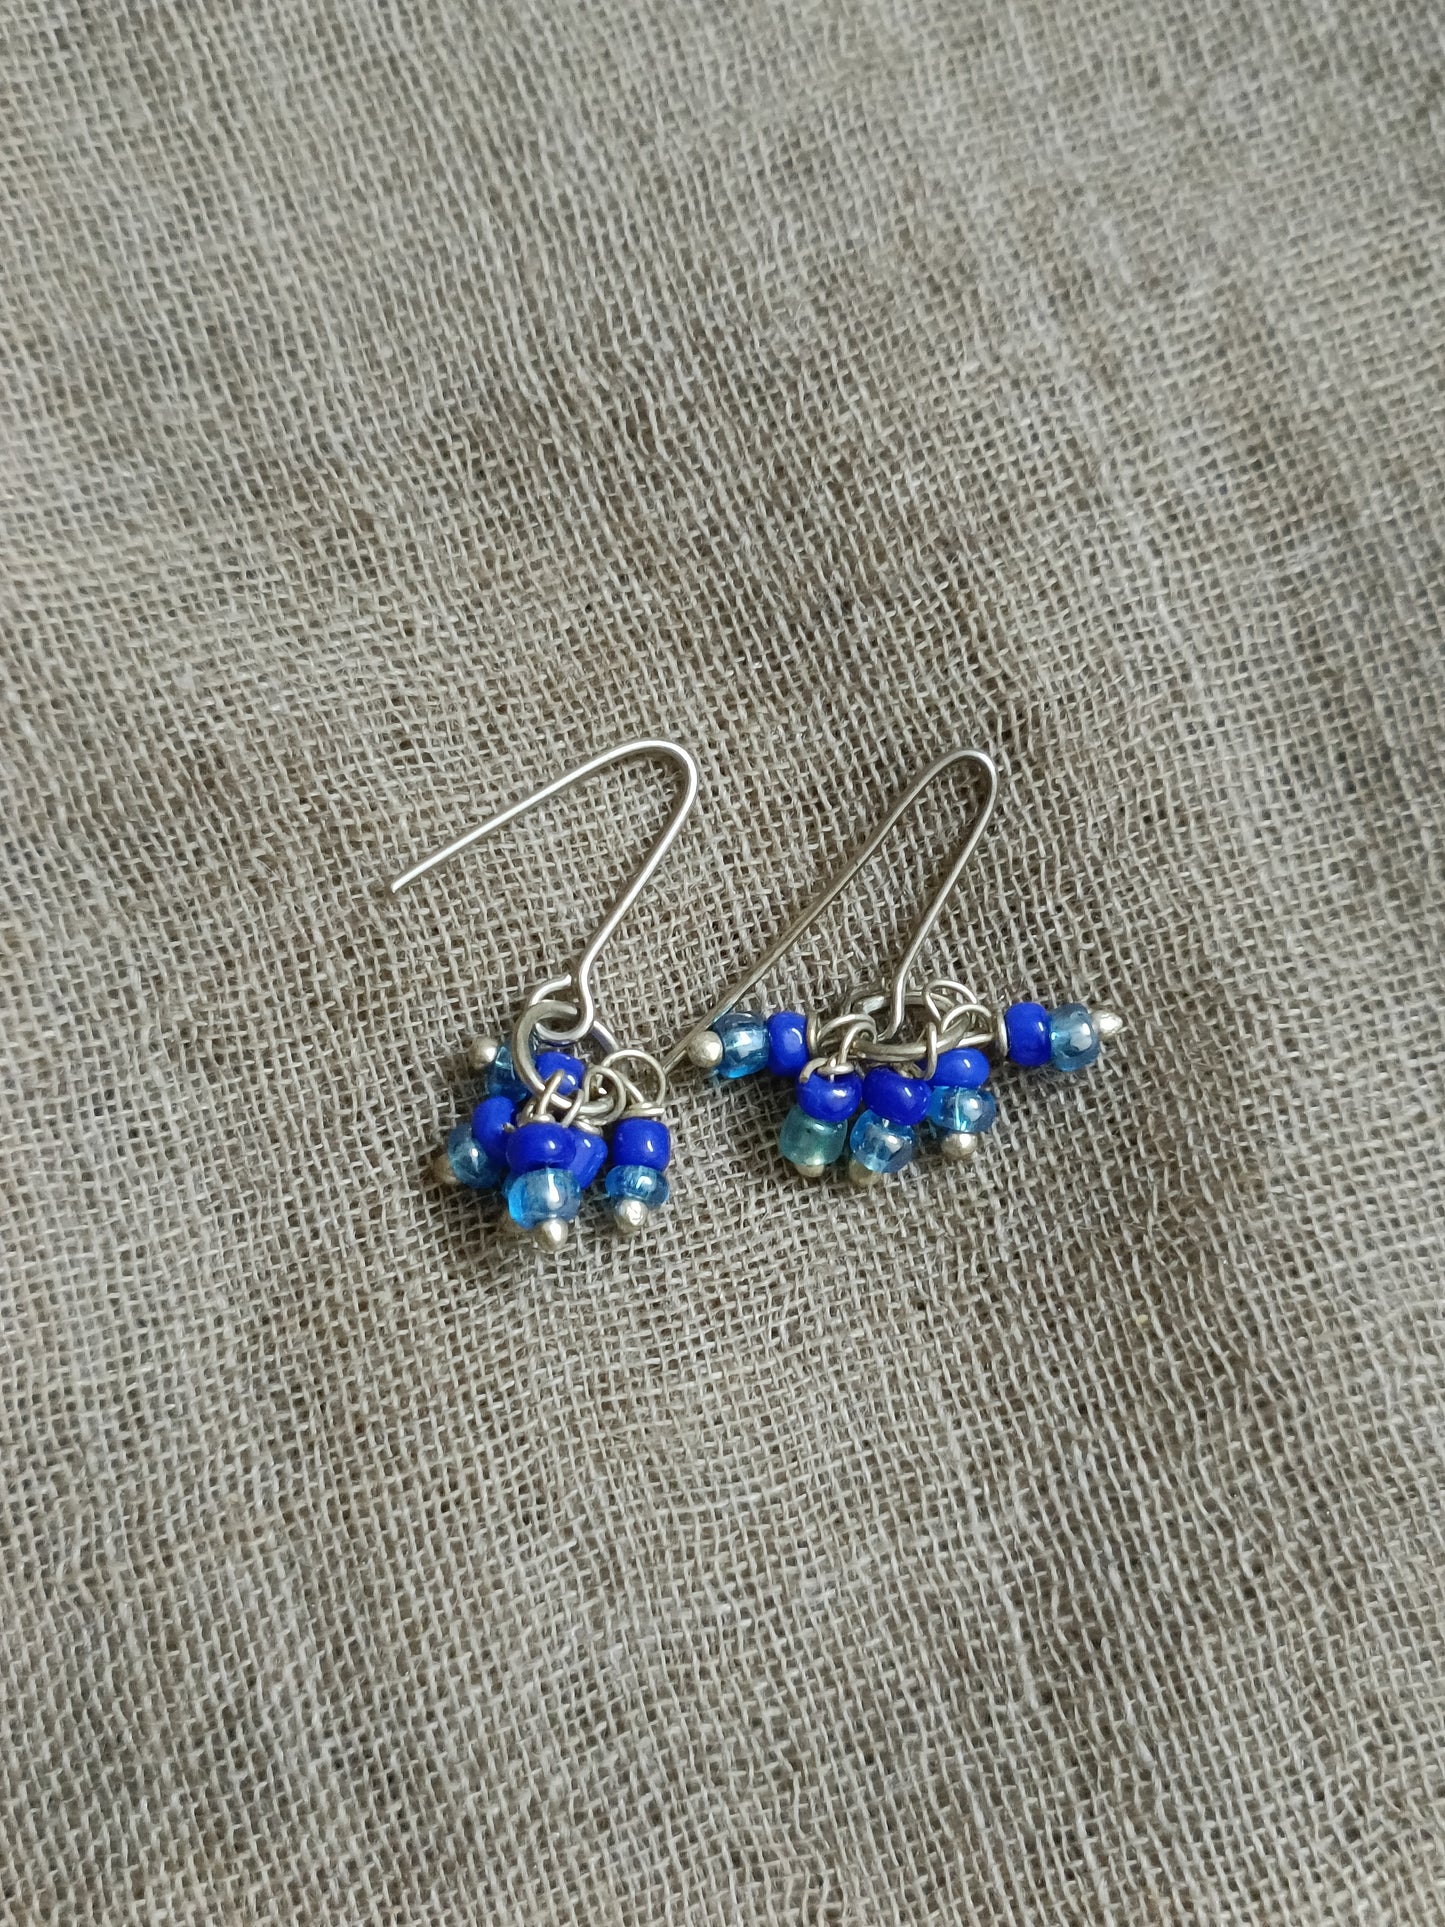 Small Hanging earrings